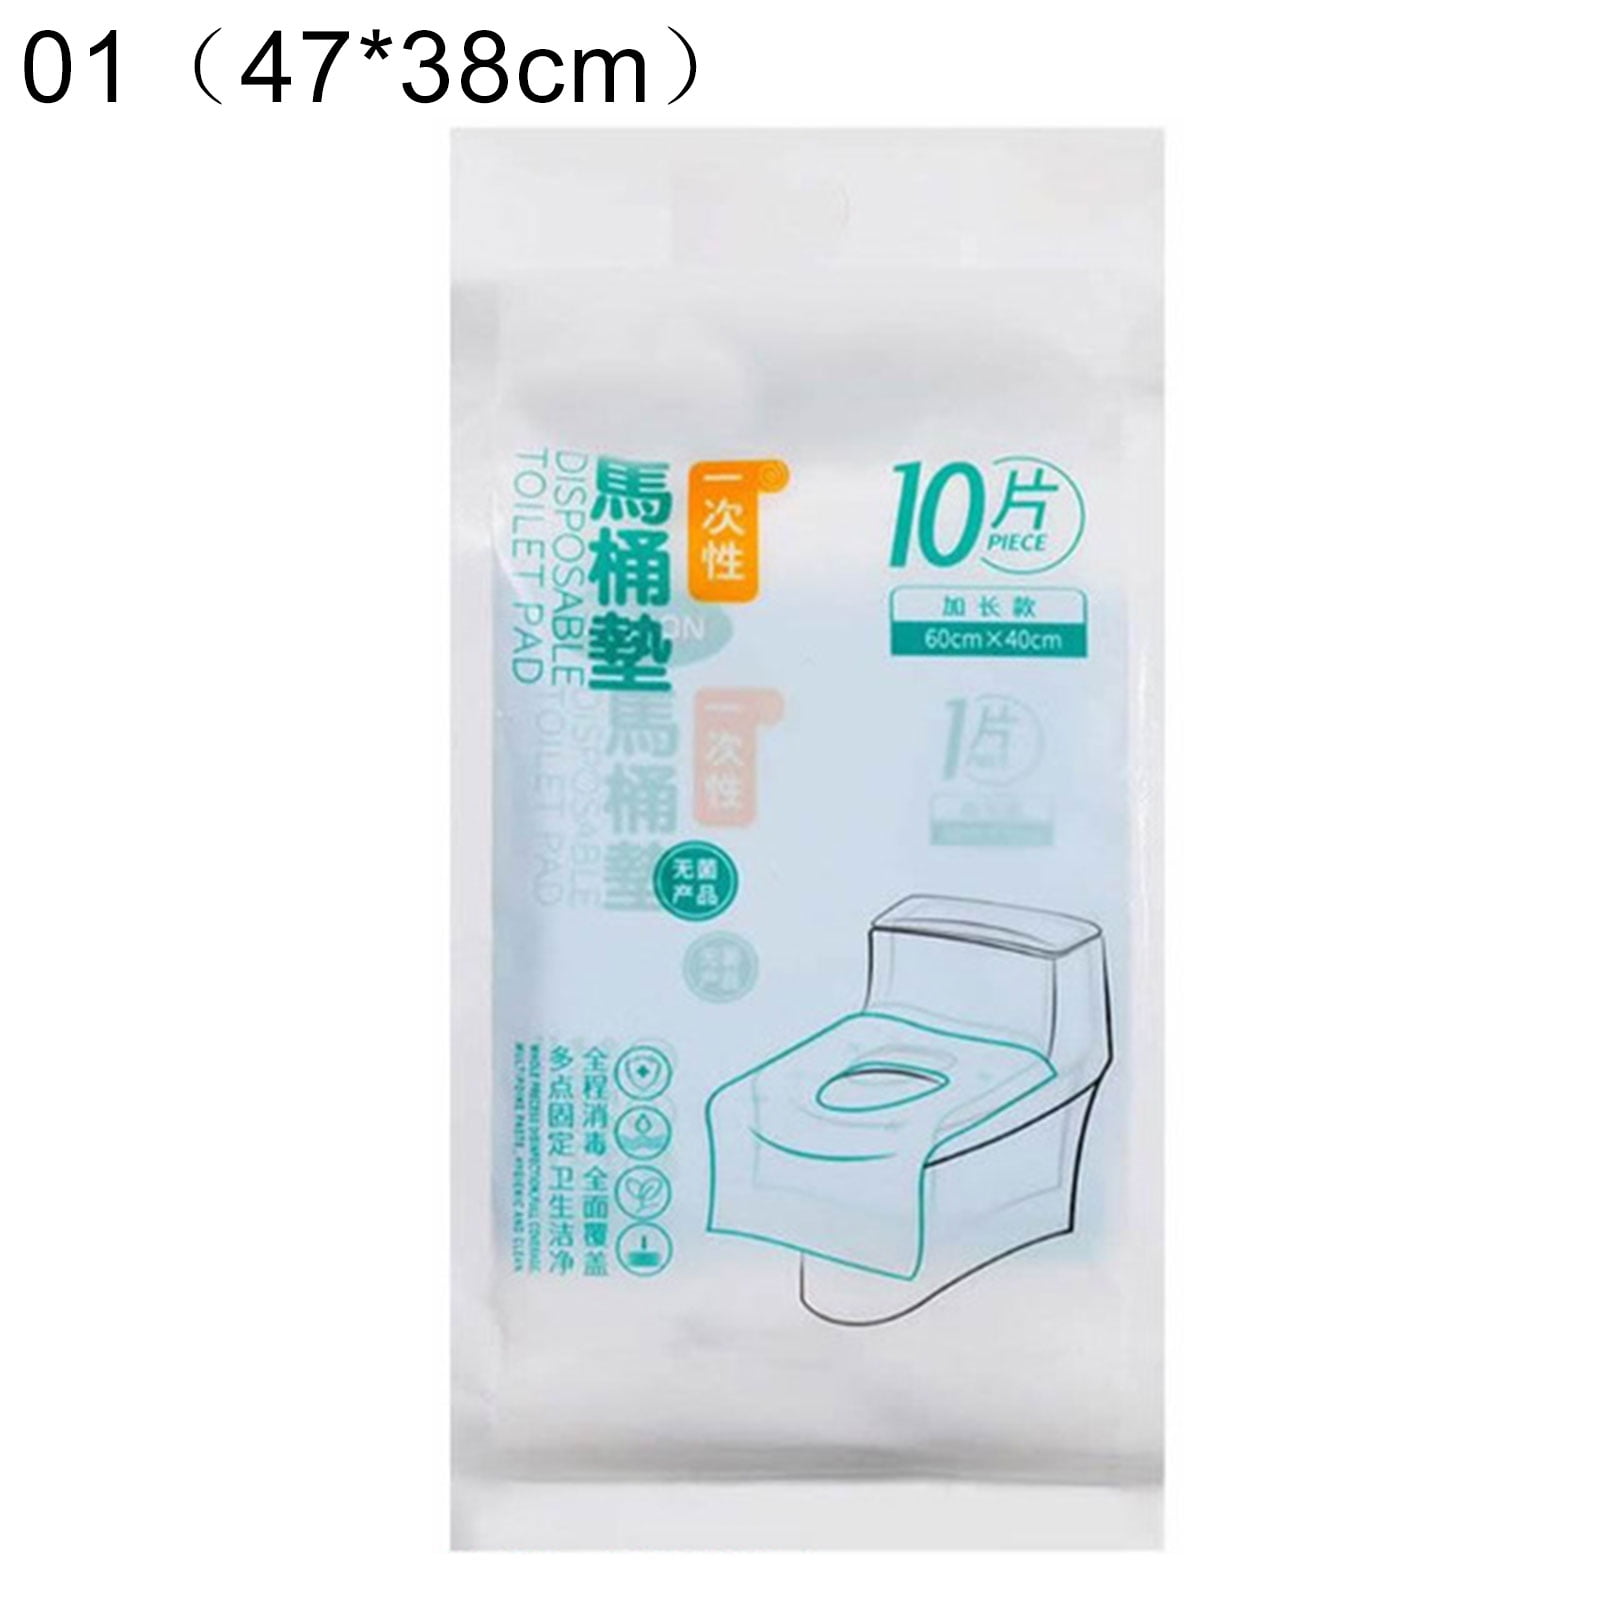 Toilet Seat Covers Disposable, 10 counts Individually Wrapped